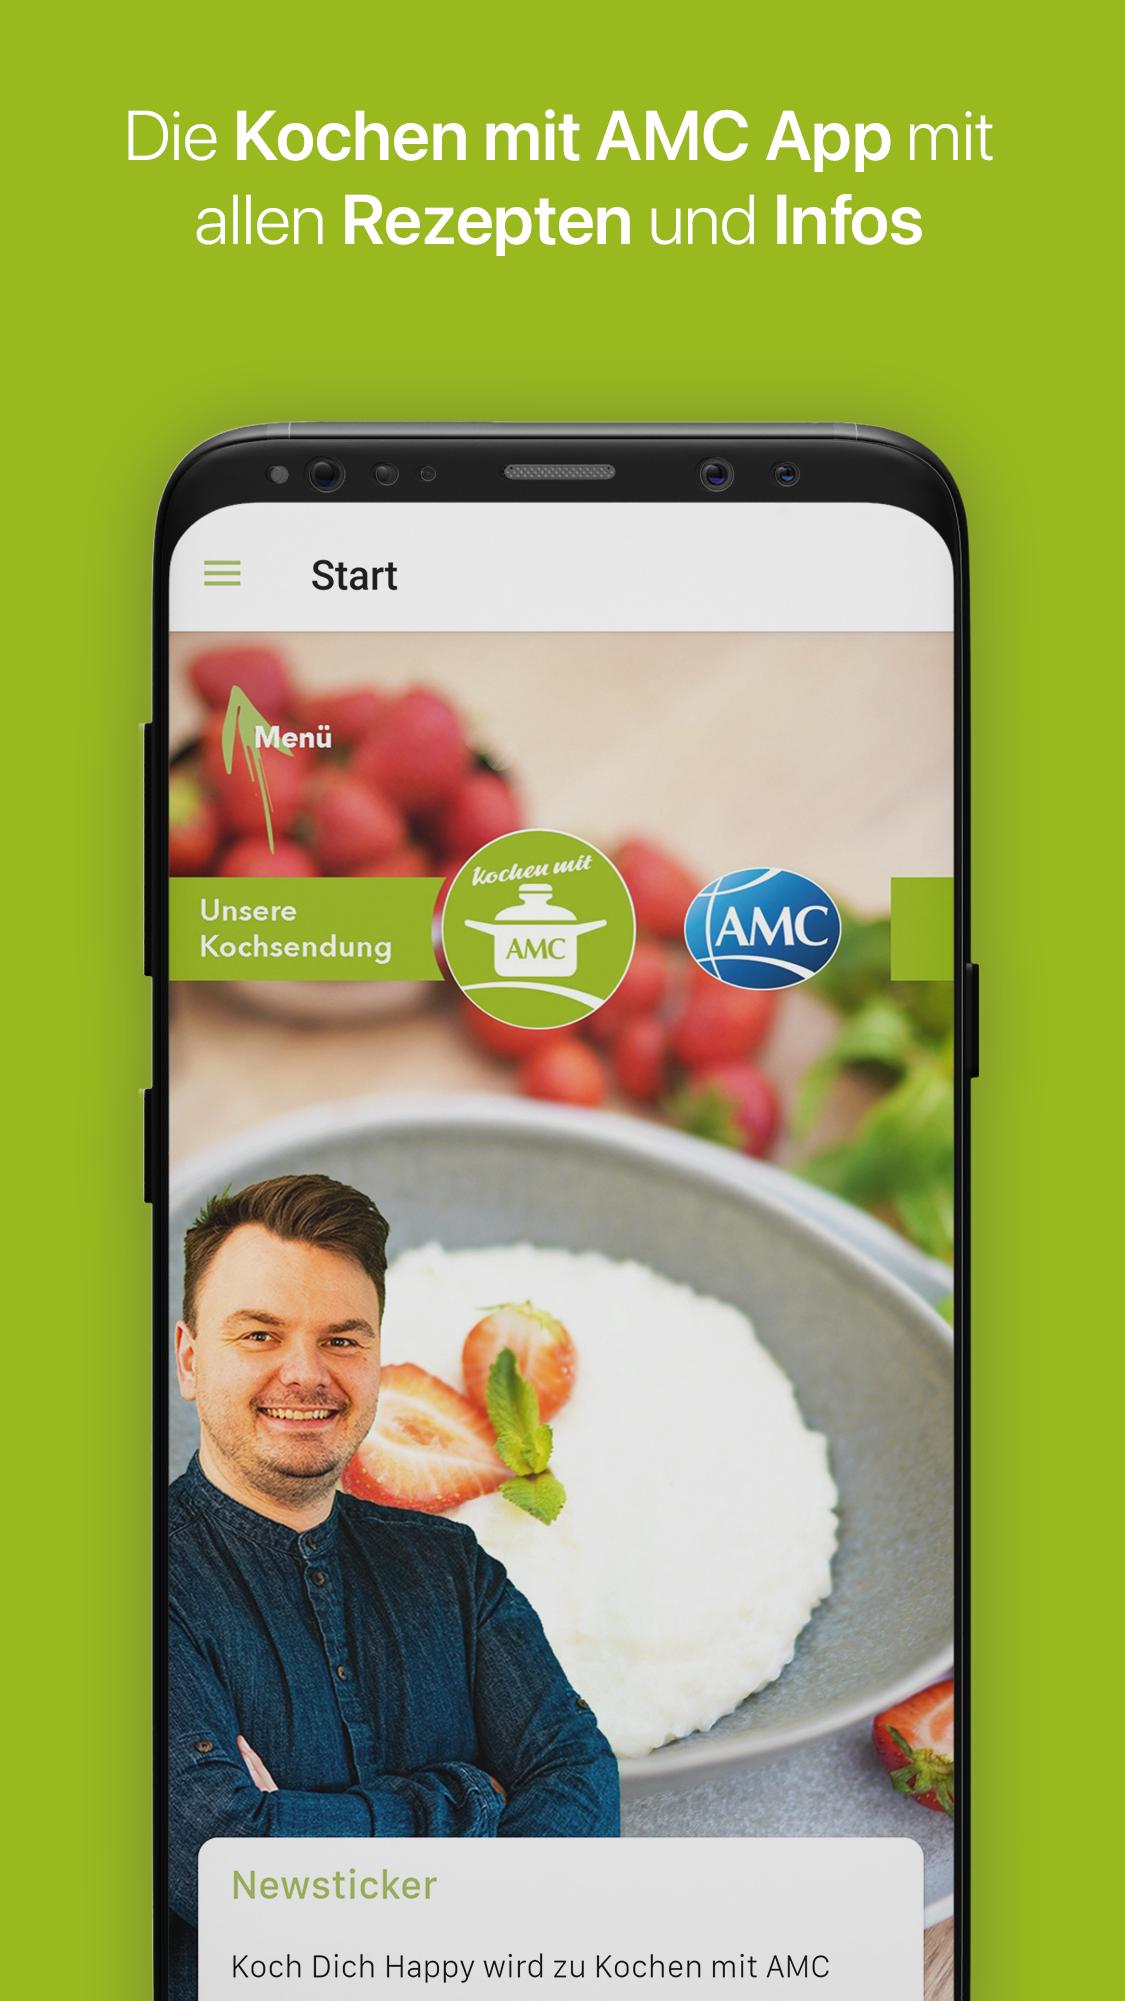 Kochen mit AMC for Android - APK Download